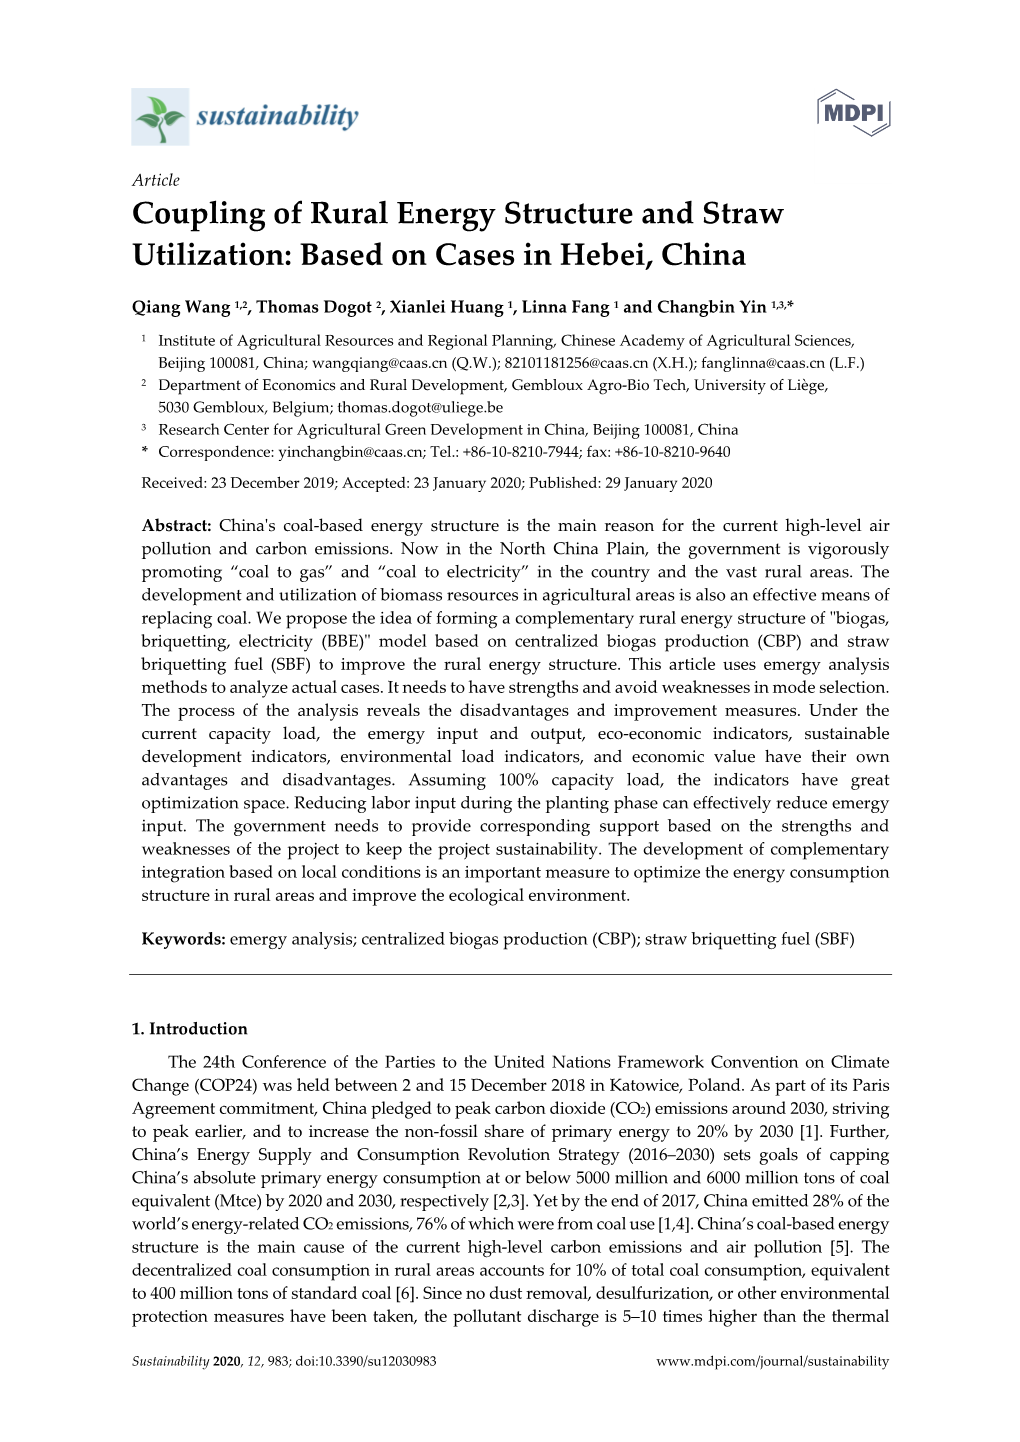 Coupling of Rural Energy Structure and Straw Utilization: Based on Cases in Hebei, China